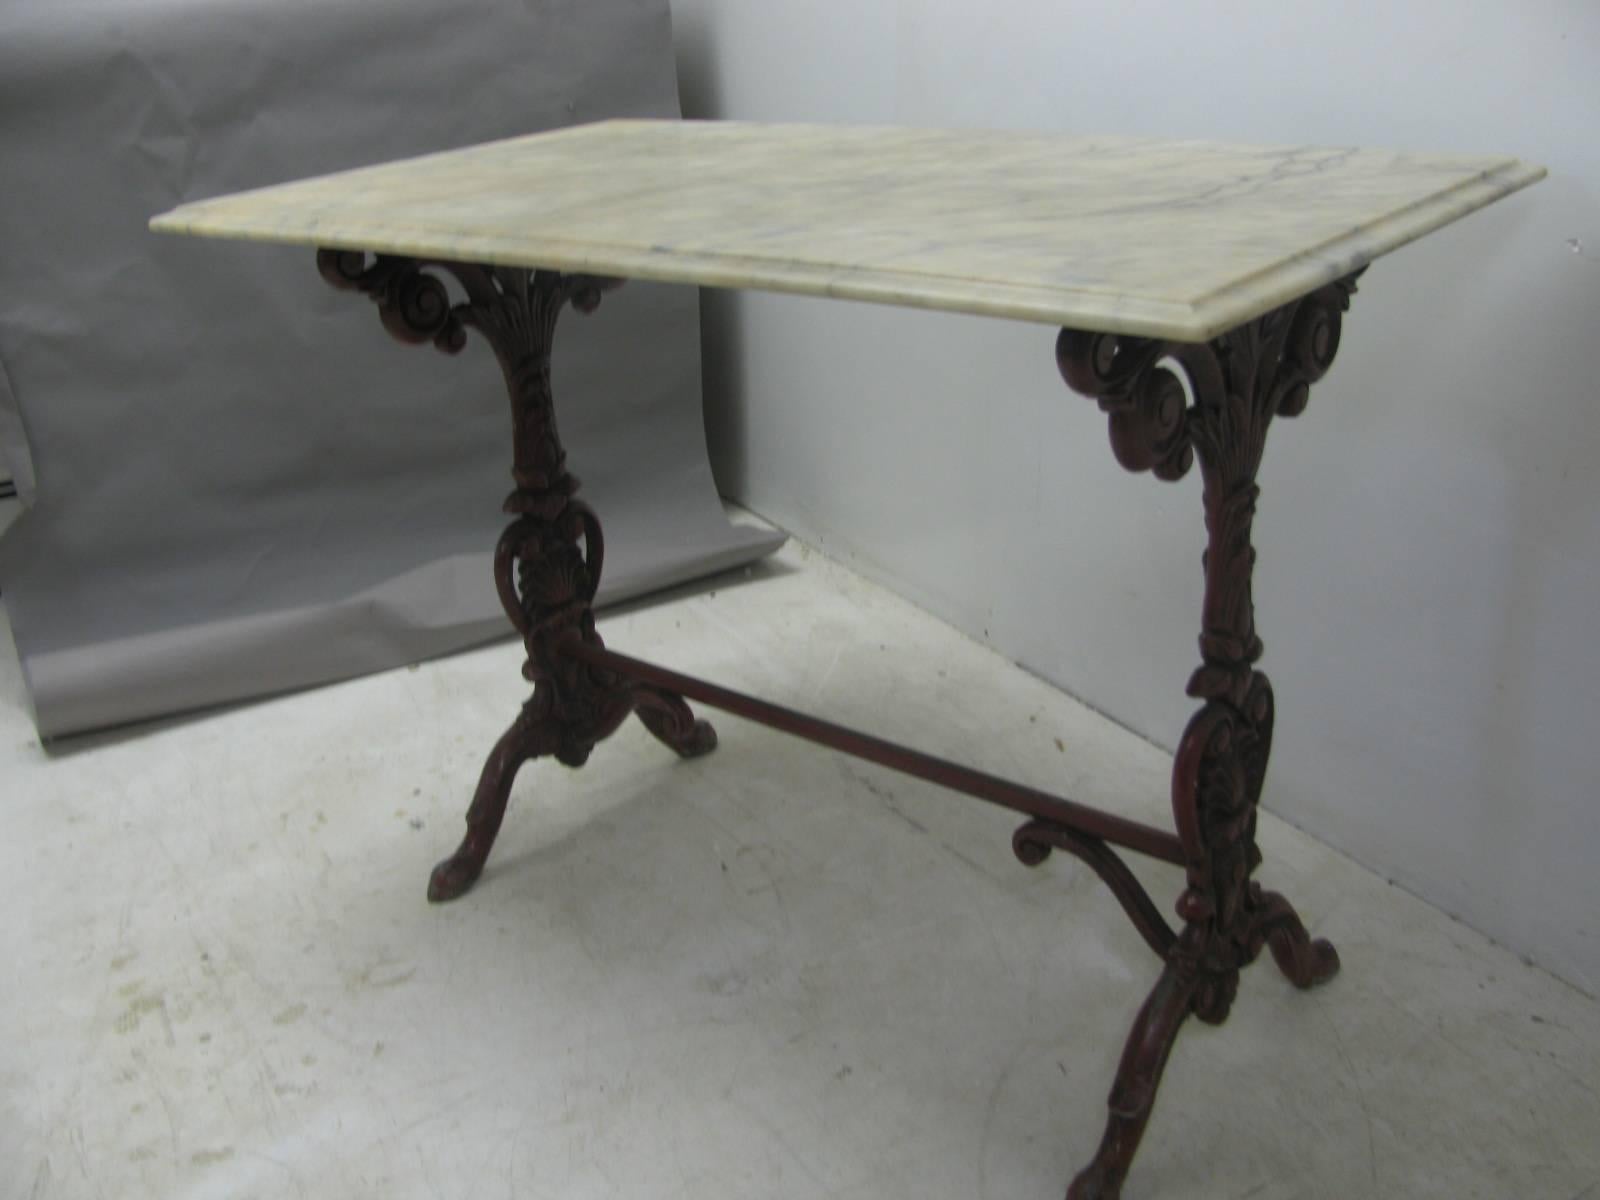 Finely detailed cast iron base with a Carrara marble top. Base still has its original red paint while the marble has endured its life collecting some discoloration. Marble top has a little nick on the underside of one edge (pictured). Both the